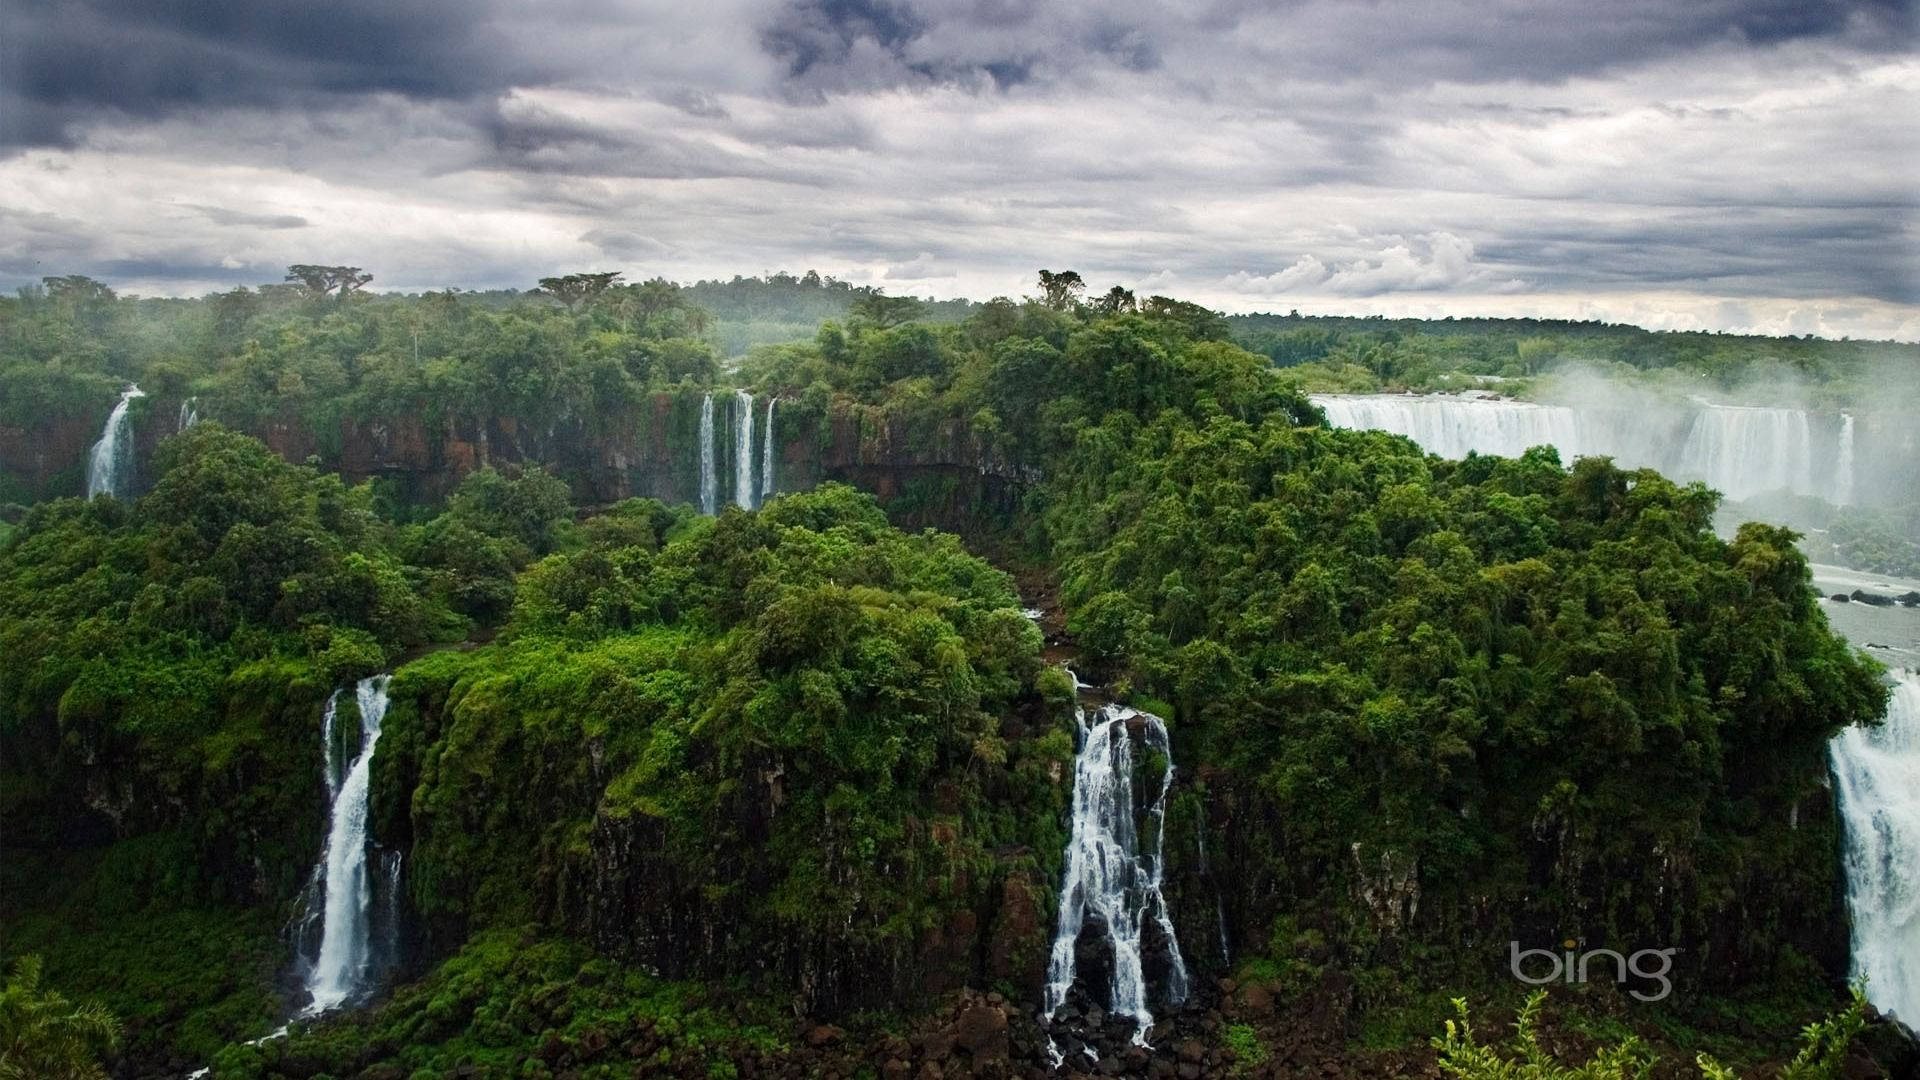 Take in a peaceful view of a green forest, surrounded by majestic waterfalls Wallpaper